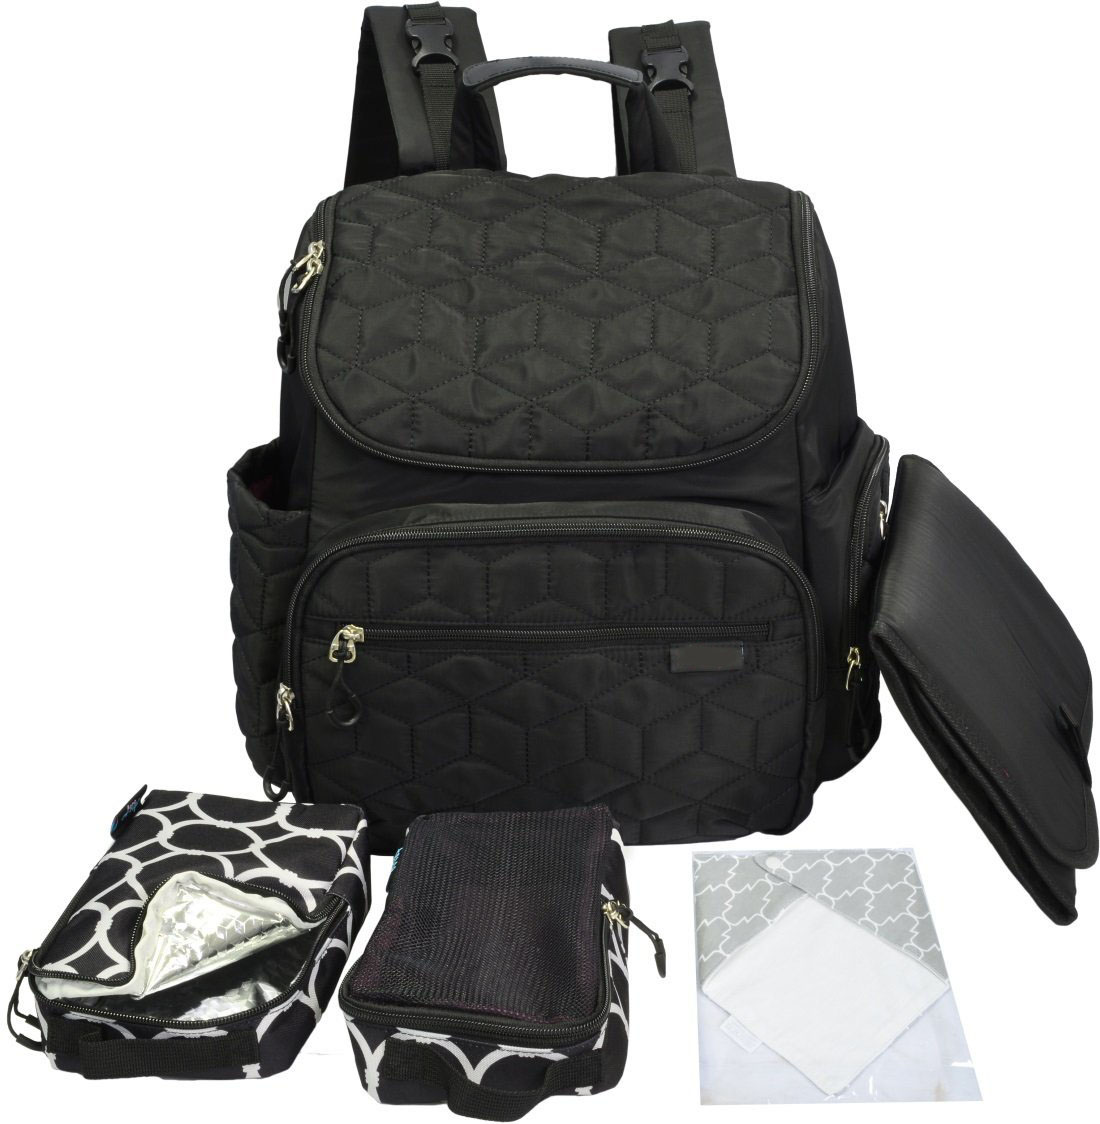 Diaper Bag Backpack Organizer with Stroller Straps and Changing Pad, Black _ENZO